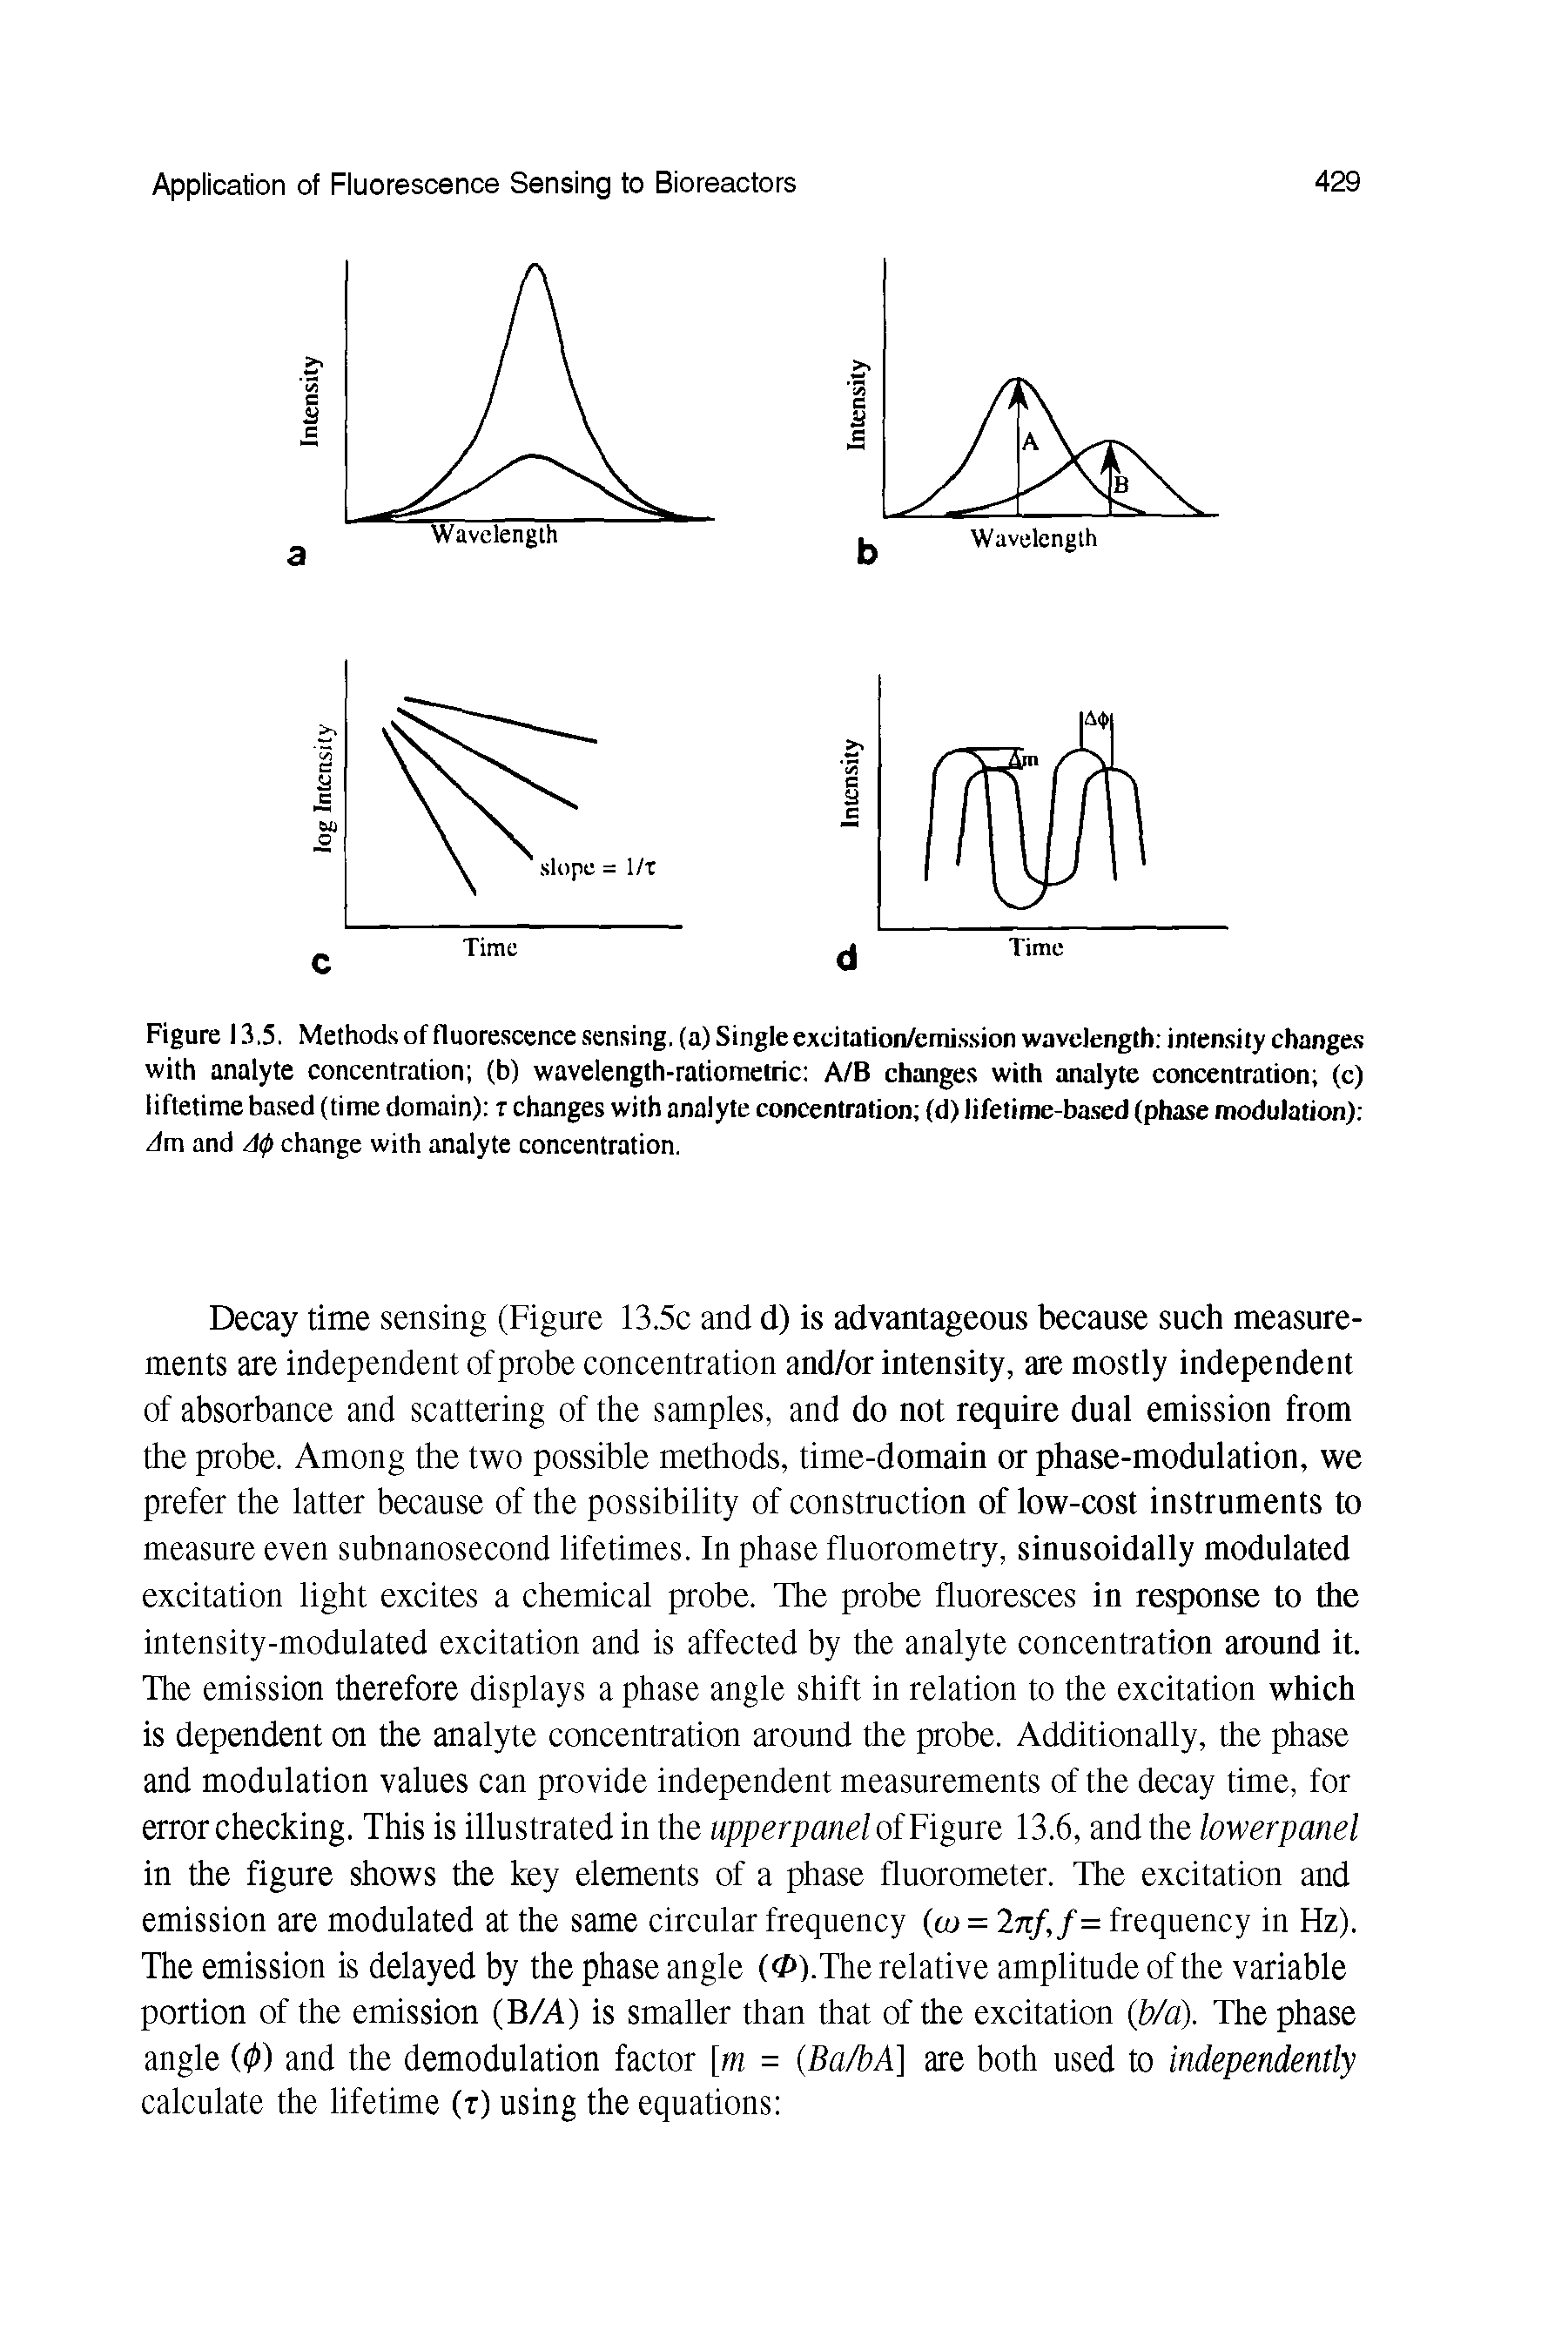 Figure 13.5. Methods of fluorescence sensing, (a) Single excitation/emission wavelength intensity changes with analyte concentration (b) wavelength-ratiometric A/B changes with analyte concentration (c) liftetime based (time domain) r changes with analyte concentration (d) lifetime-based (phase modulation) Am and A<j> change with analyte concentration.